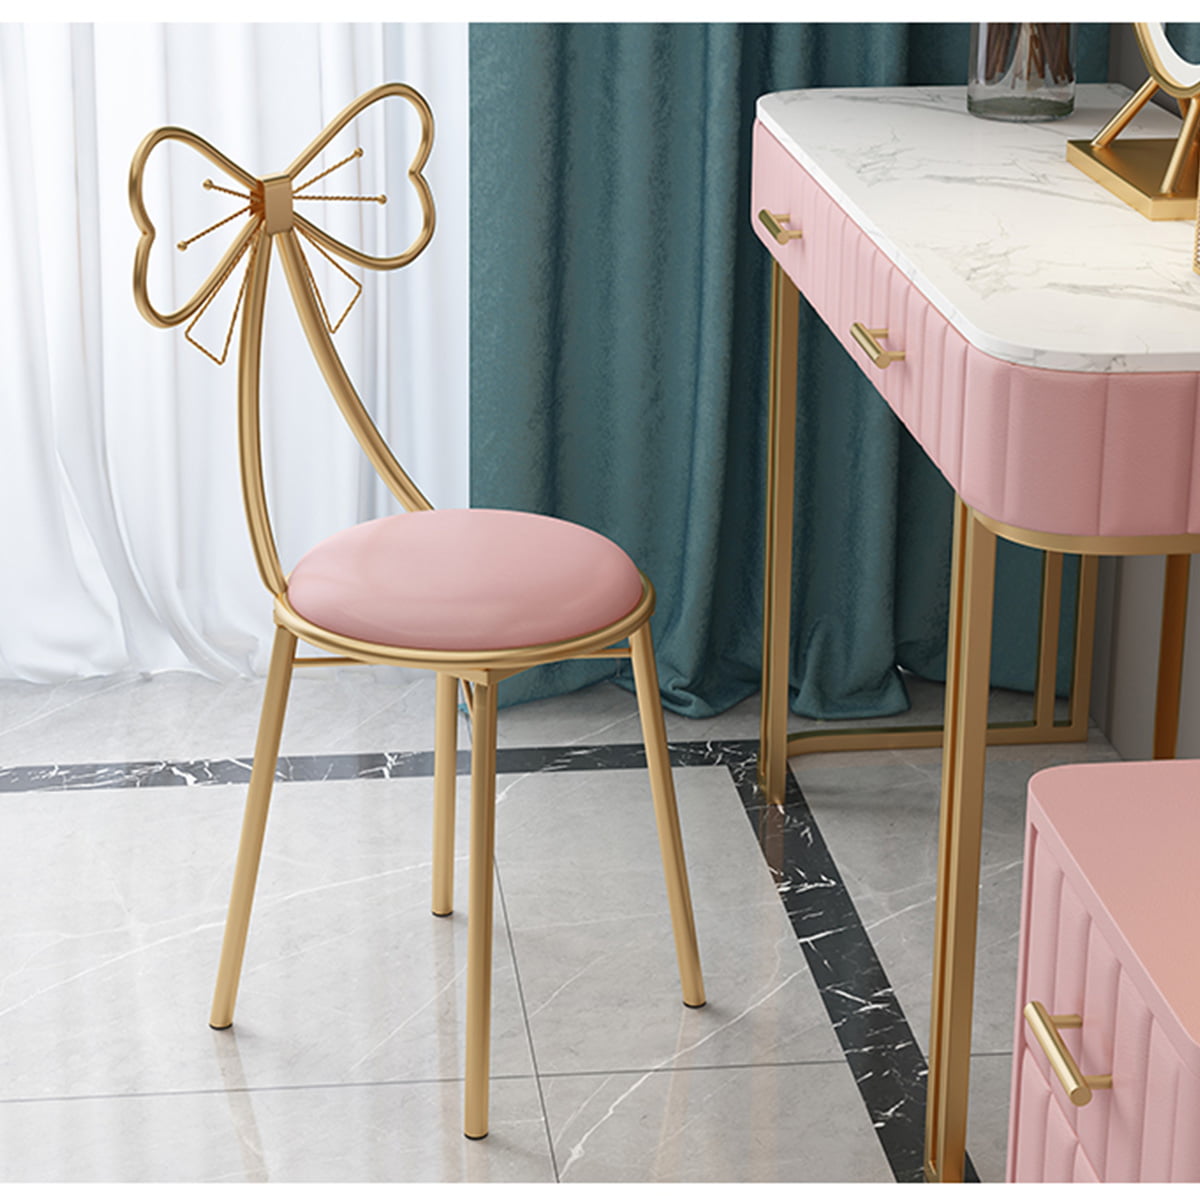 Makeup Artist Stool Dining Chairs, Vanity Stool Bench For Bathroom